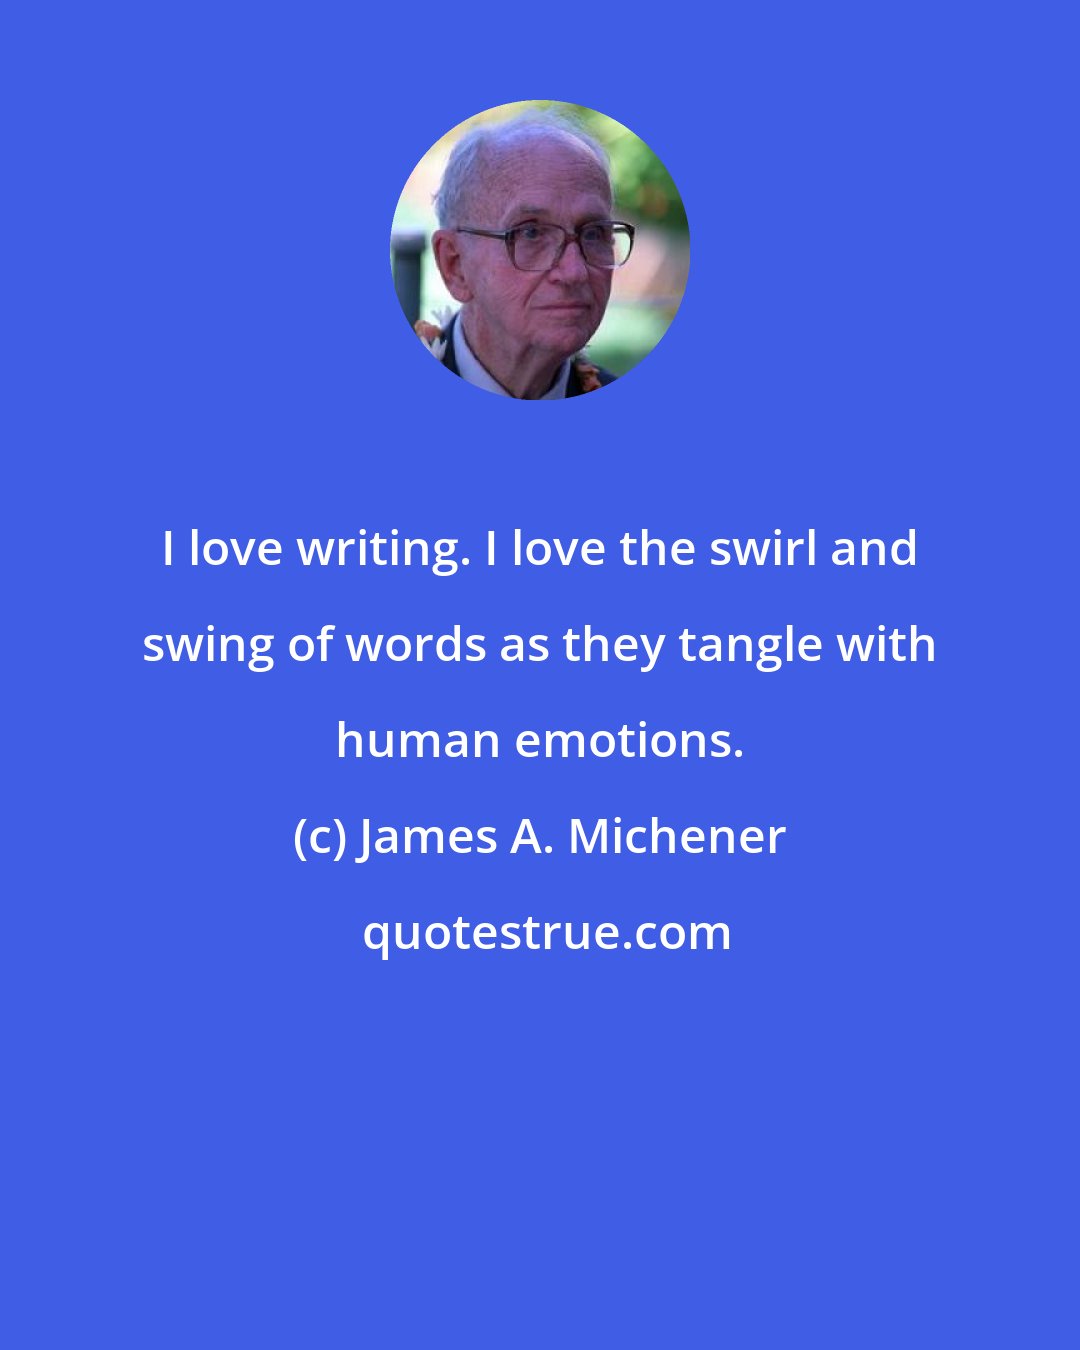 James A. Michener: I love writing. I love the swirl and swing of words as they tangle with human emotions.